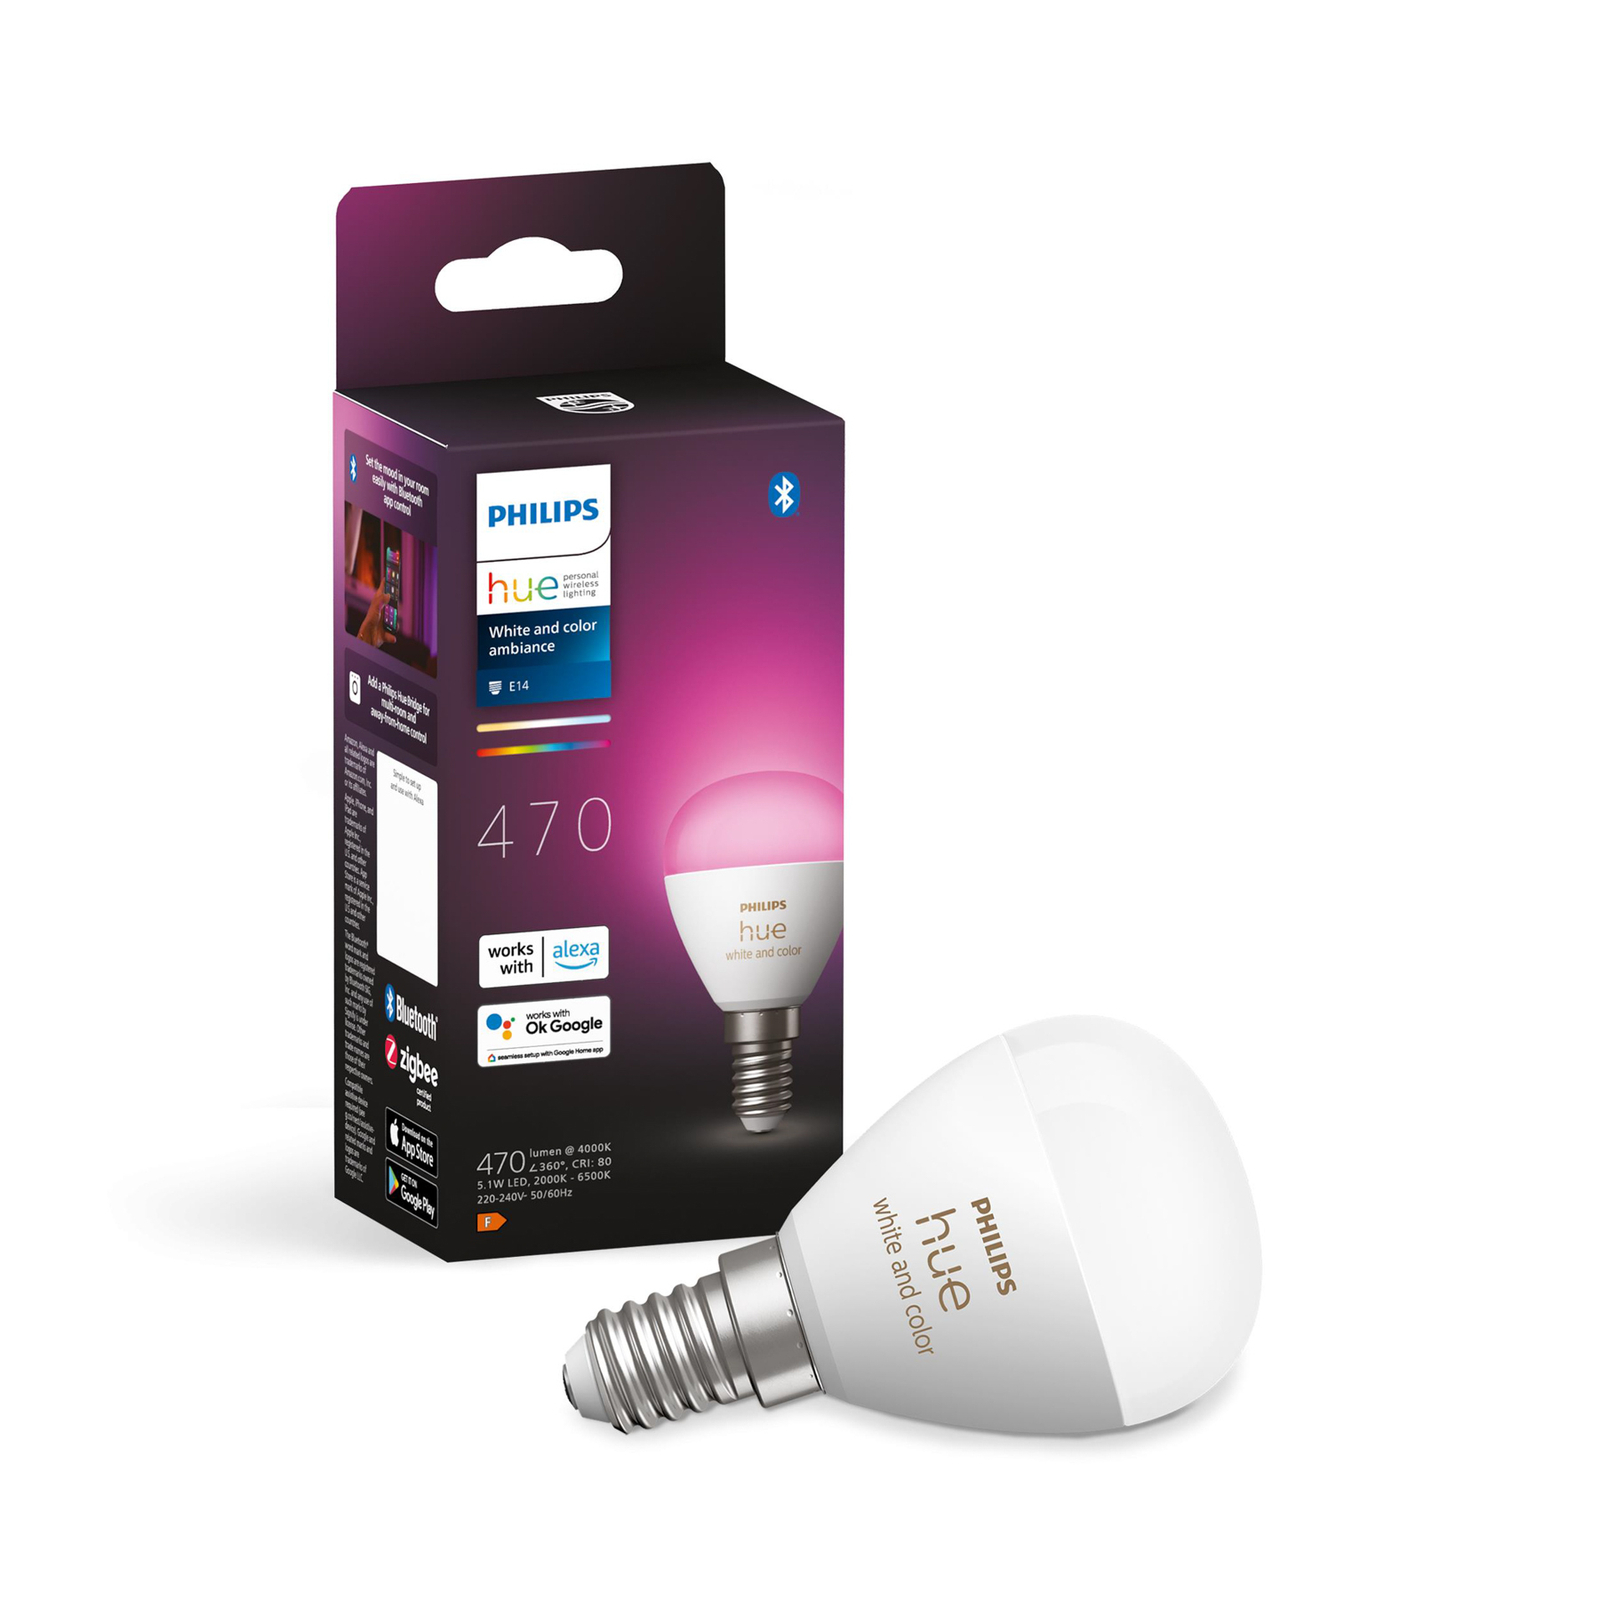 Philips Hue White&Color Ambiance E14 5.1W 470 lm